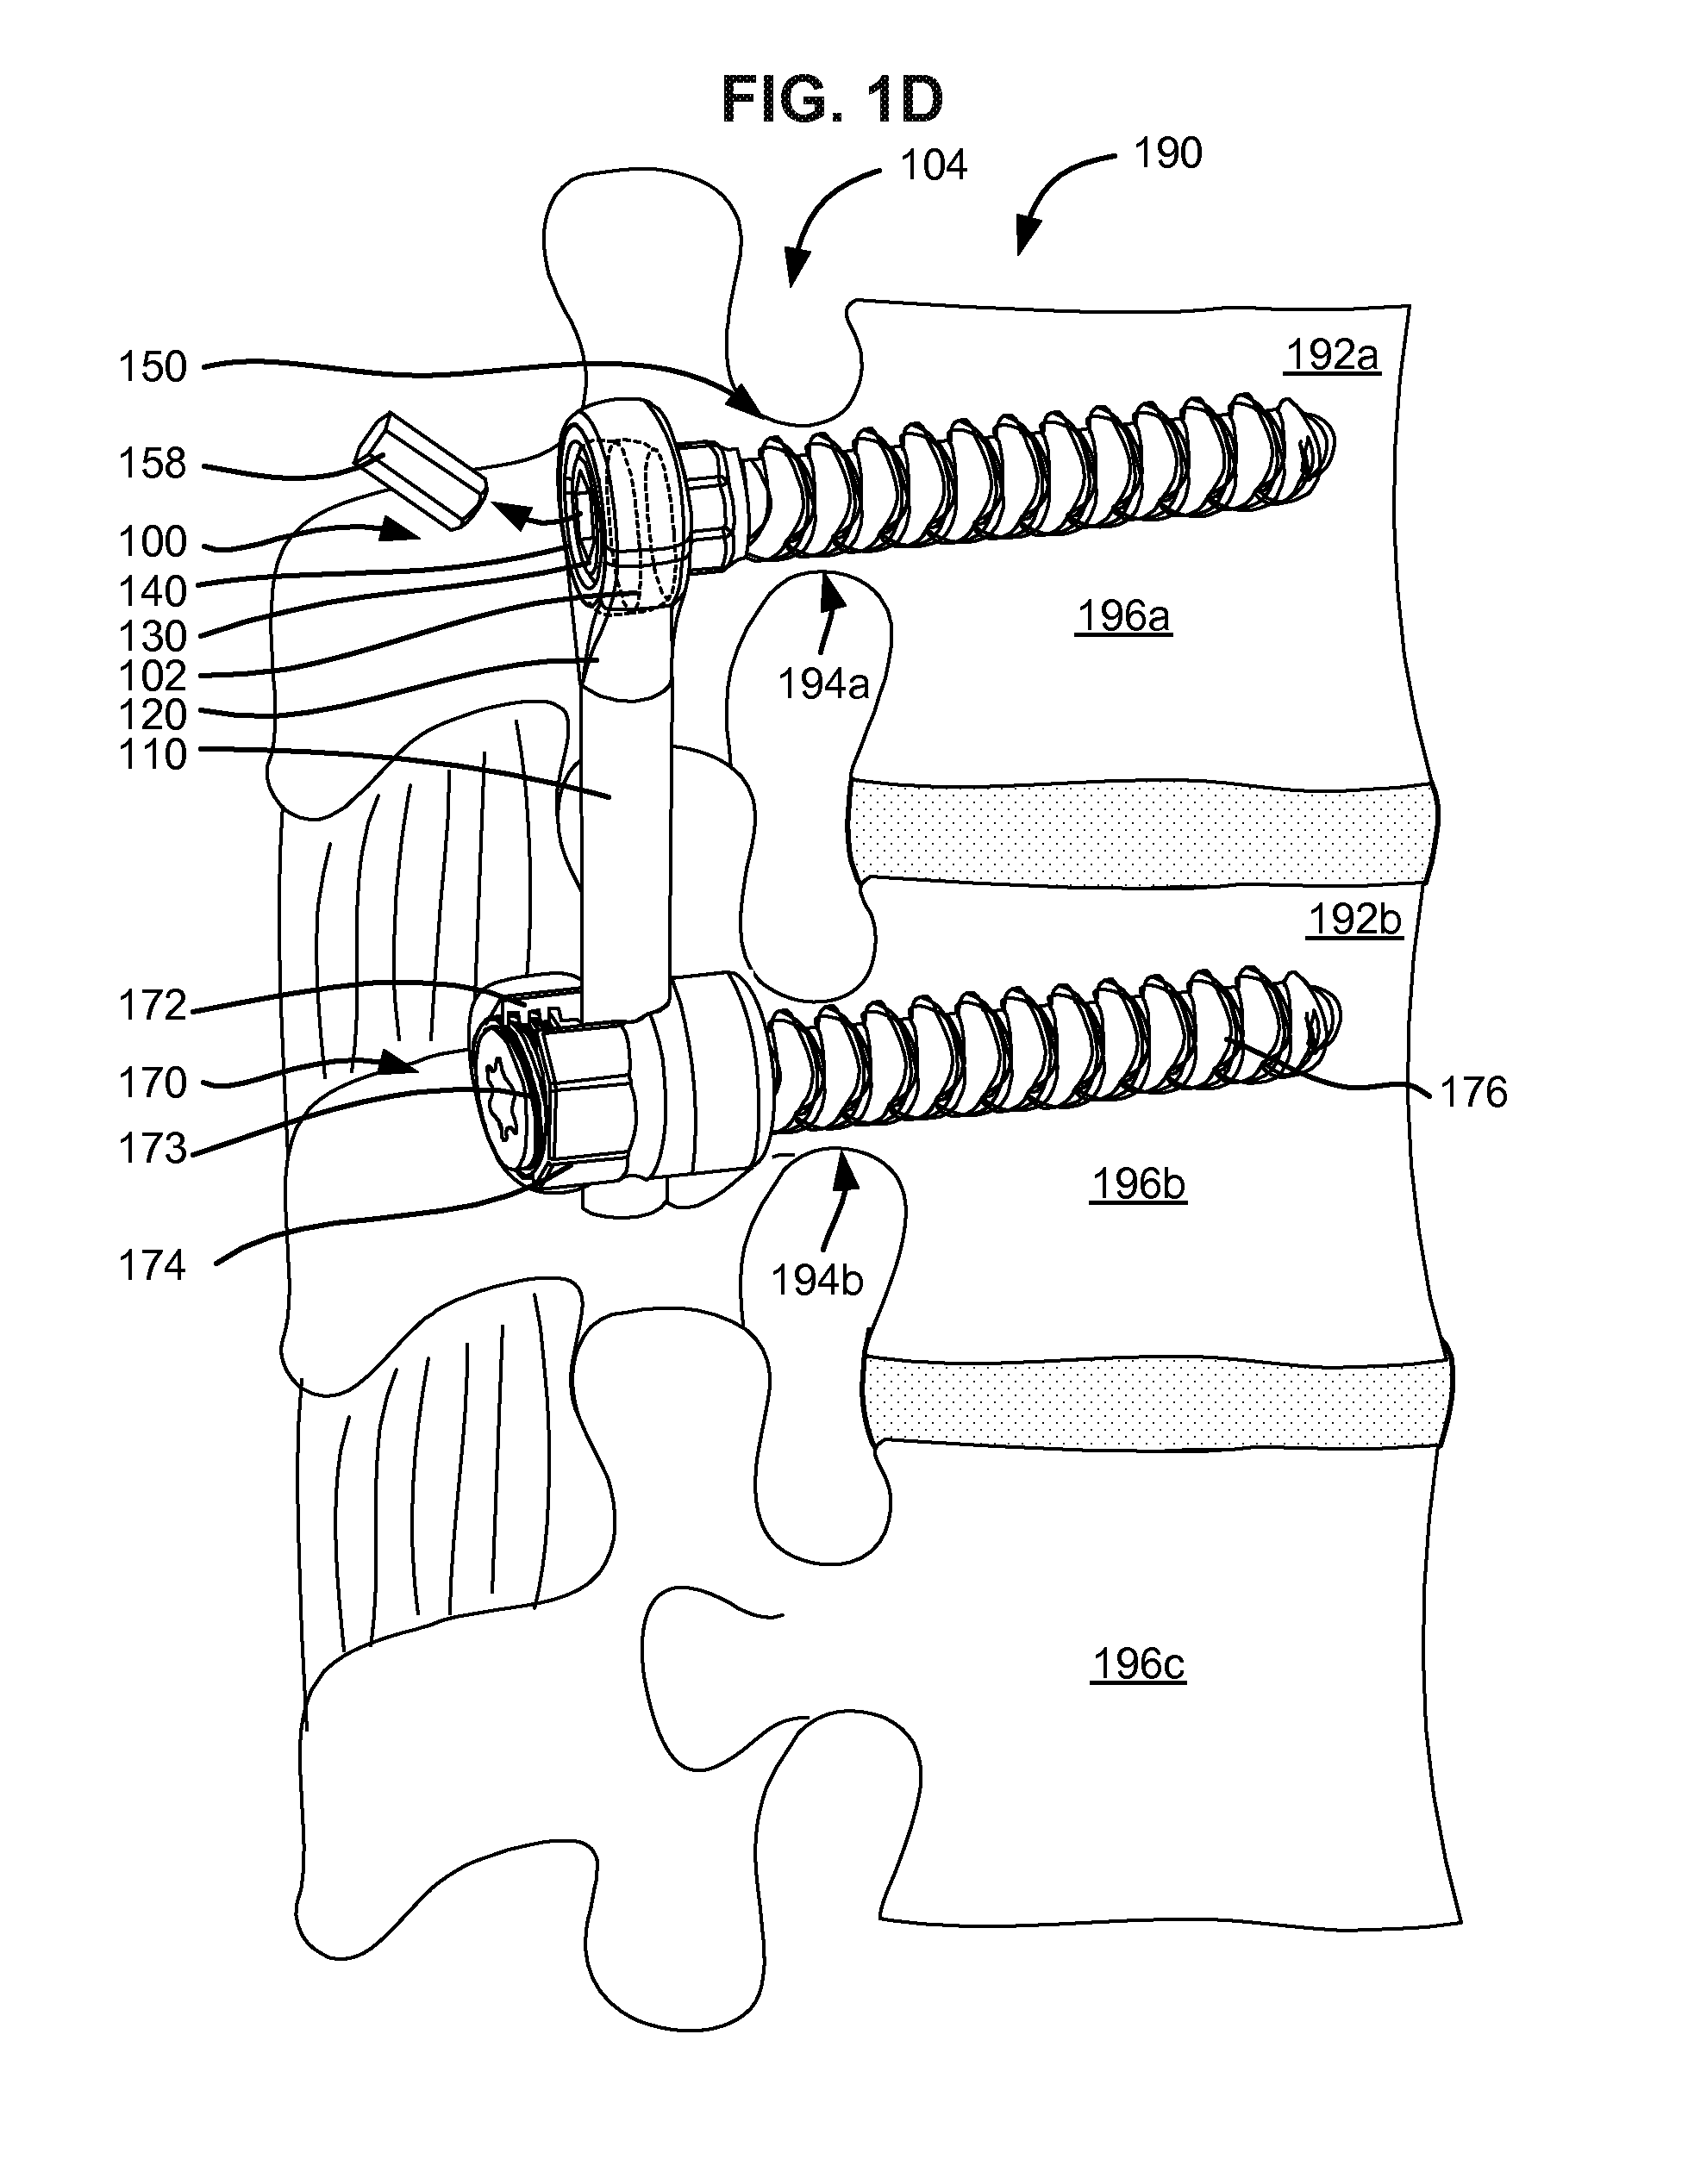 Adaptive spinal rod and methods for stabilization of the spine